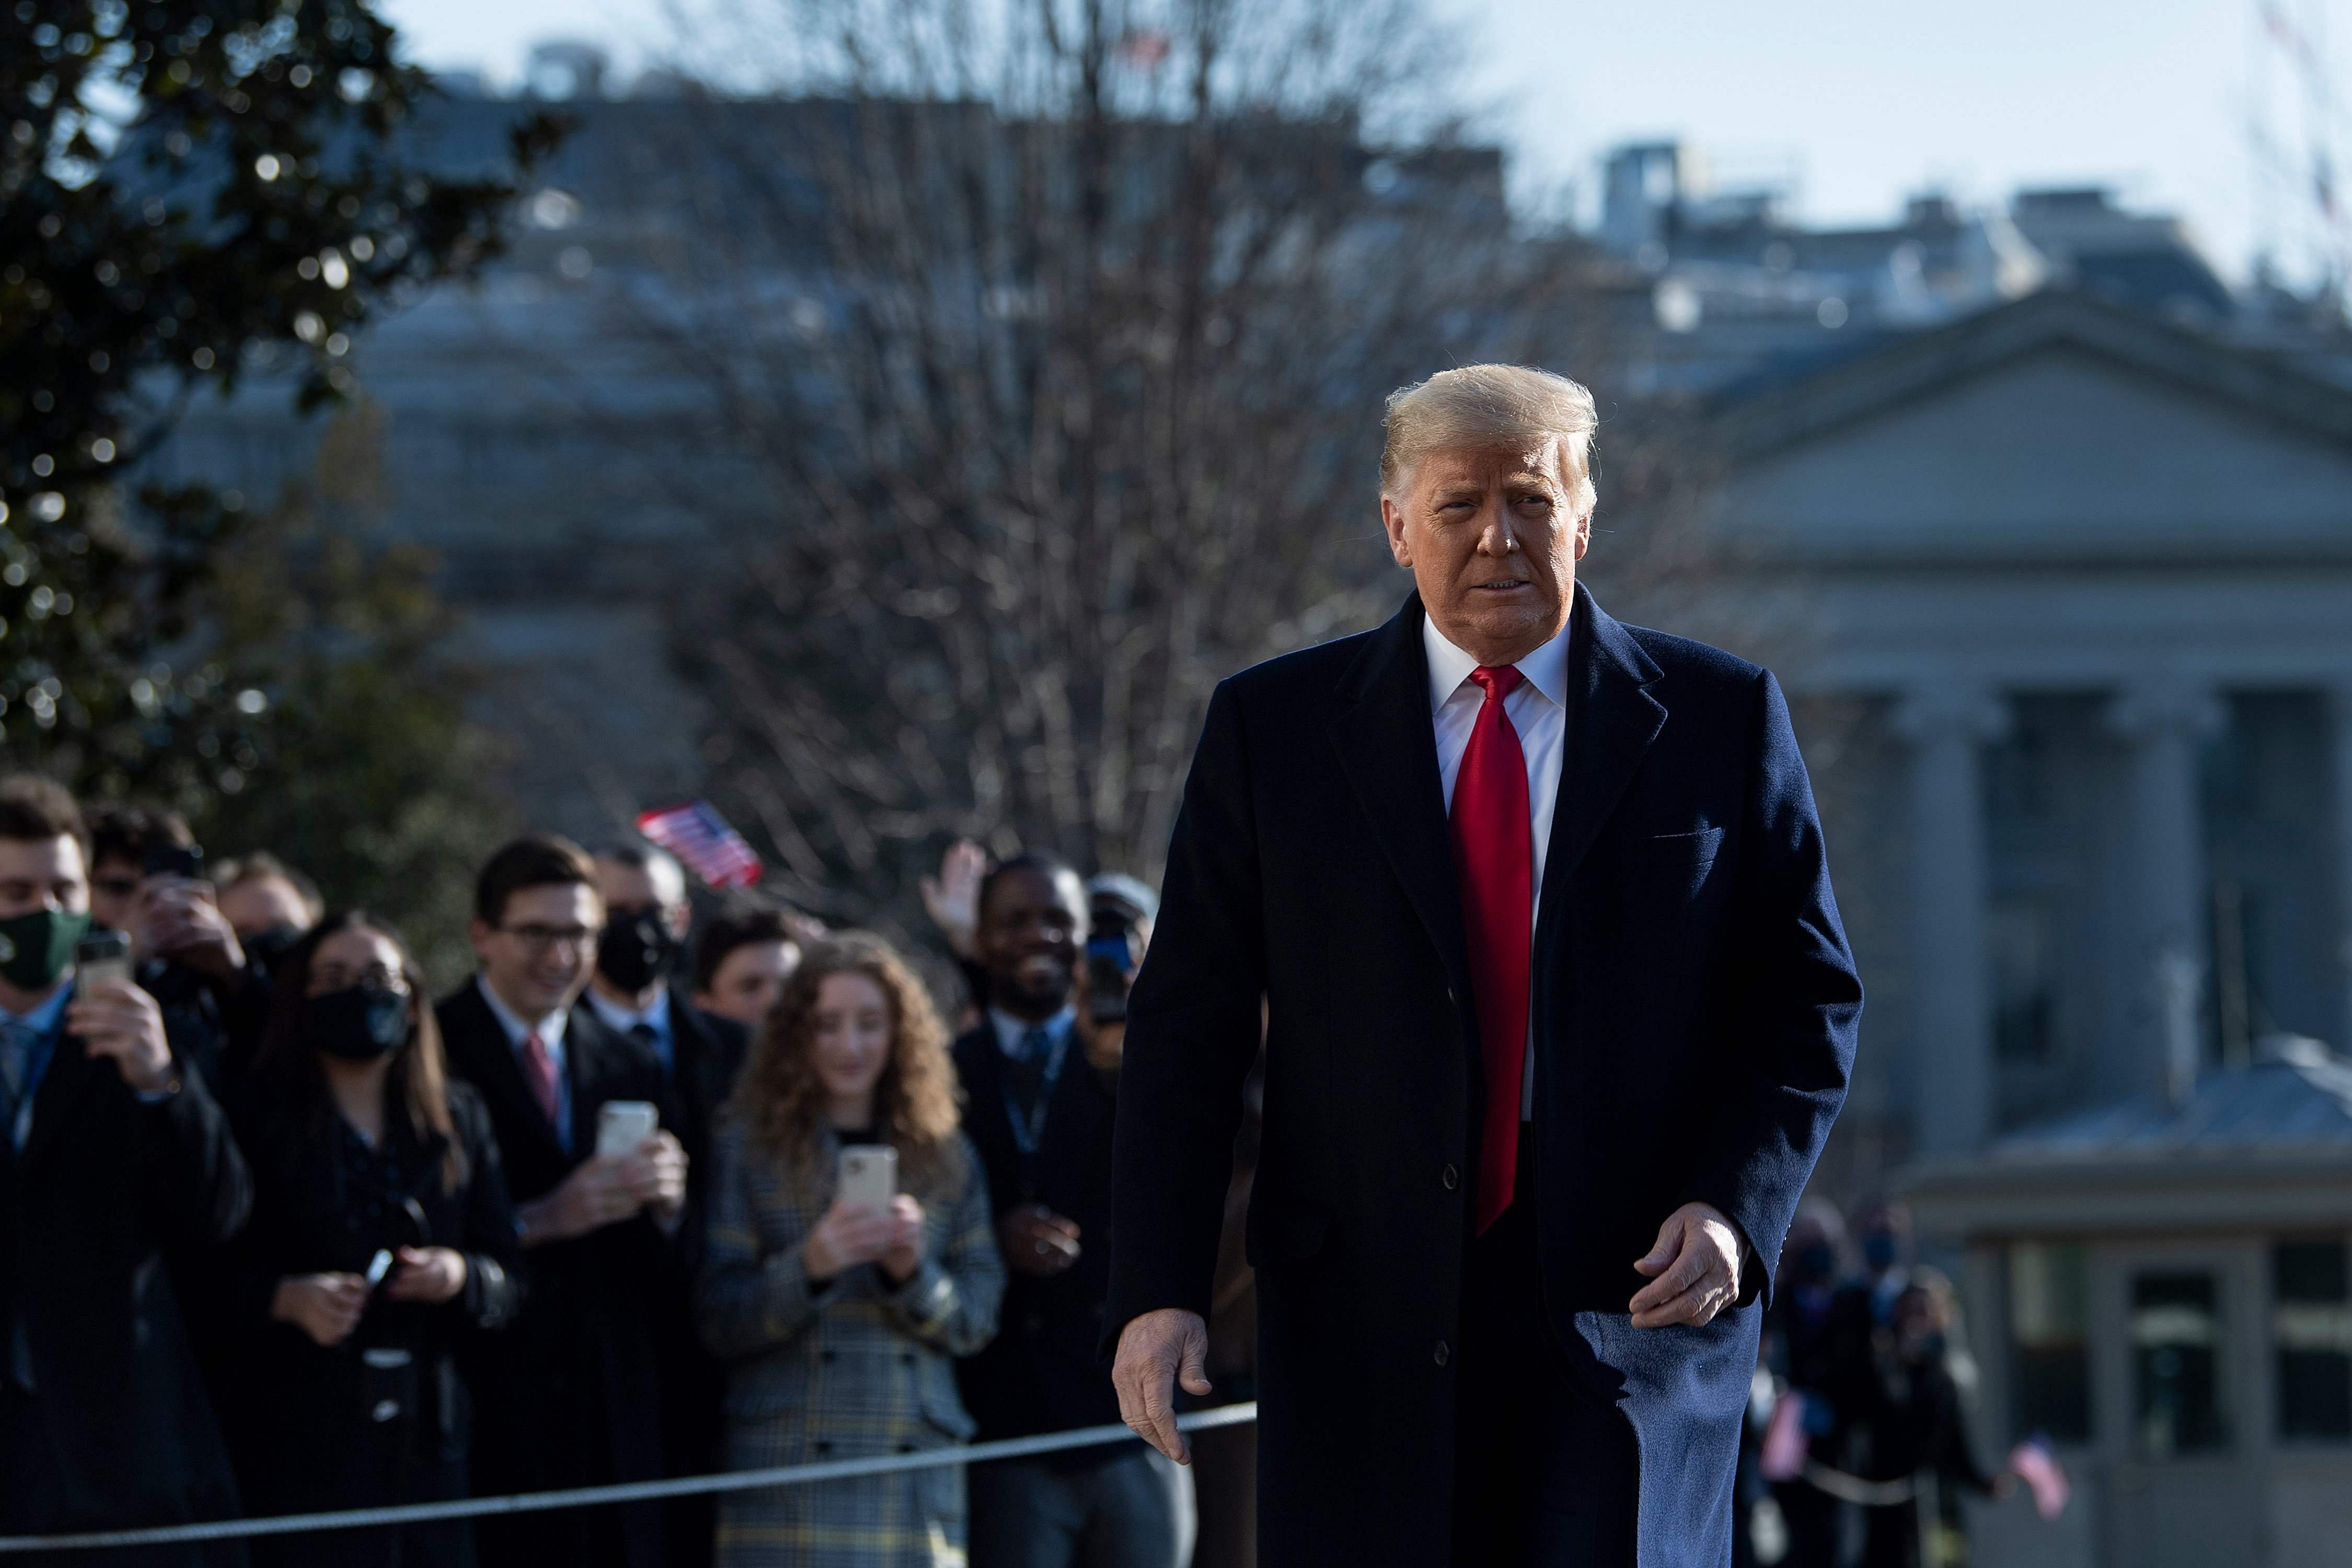 US President Donald Trump walks by supporters outside the White House on January 12, 2021 in Washington,DC before his departure to Alamo, Texas. Credit: AFP Photo